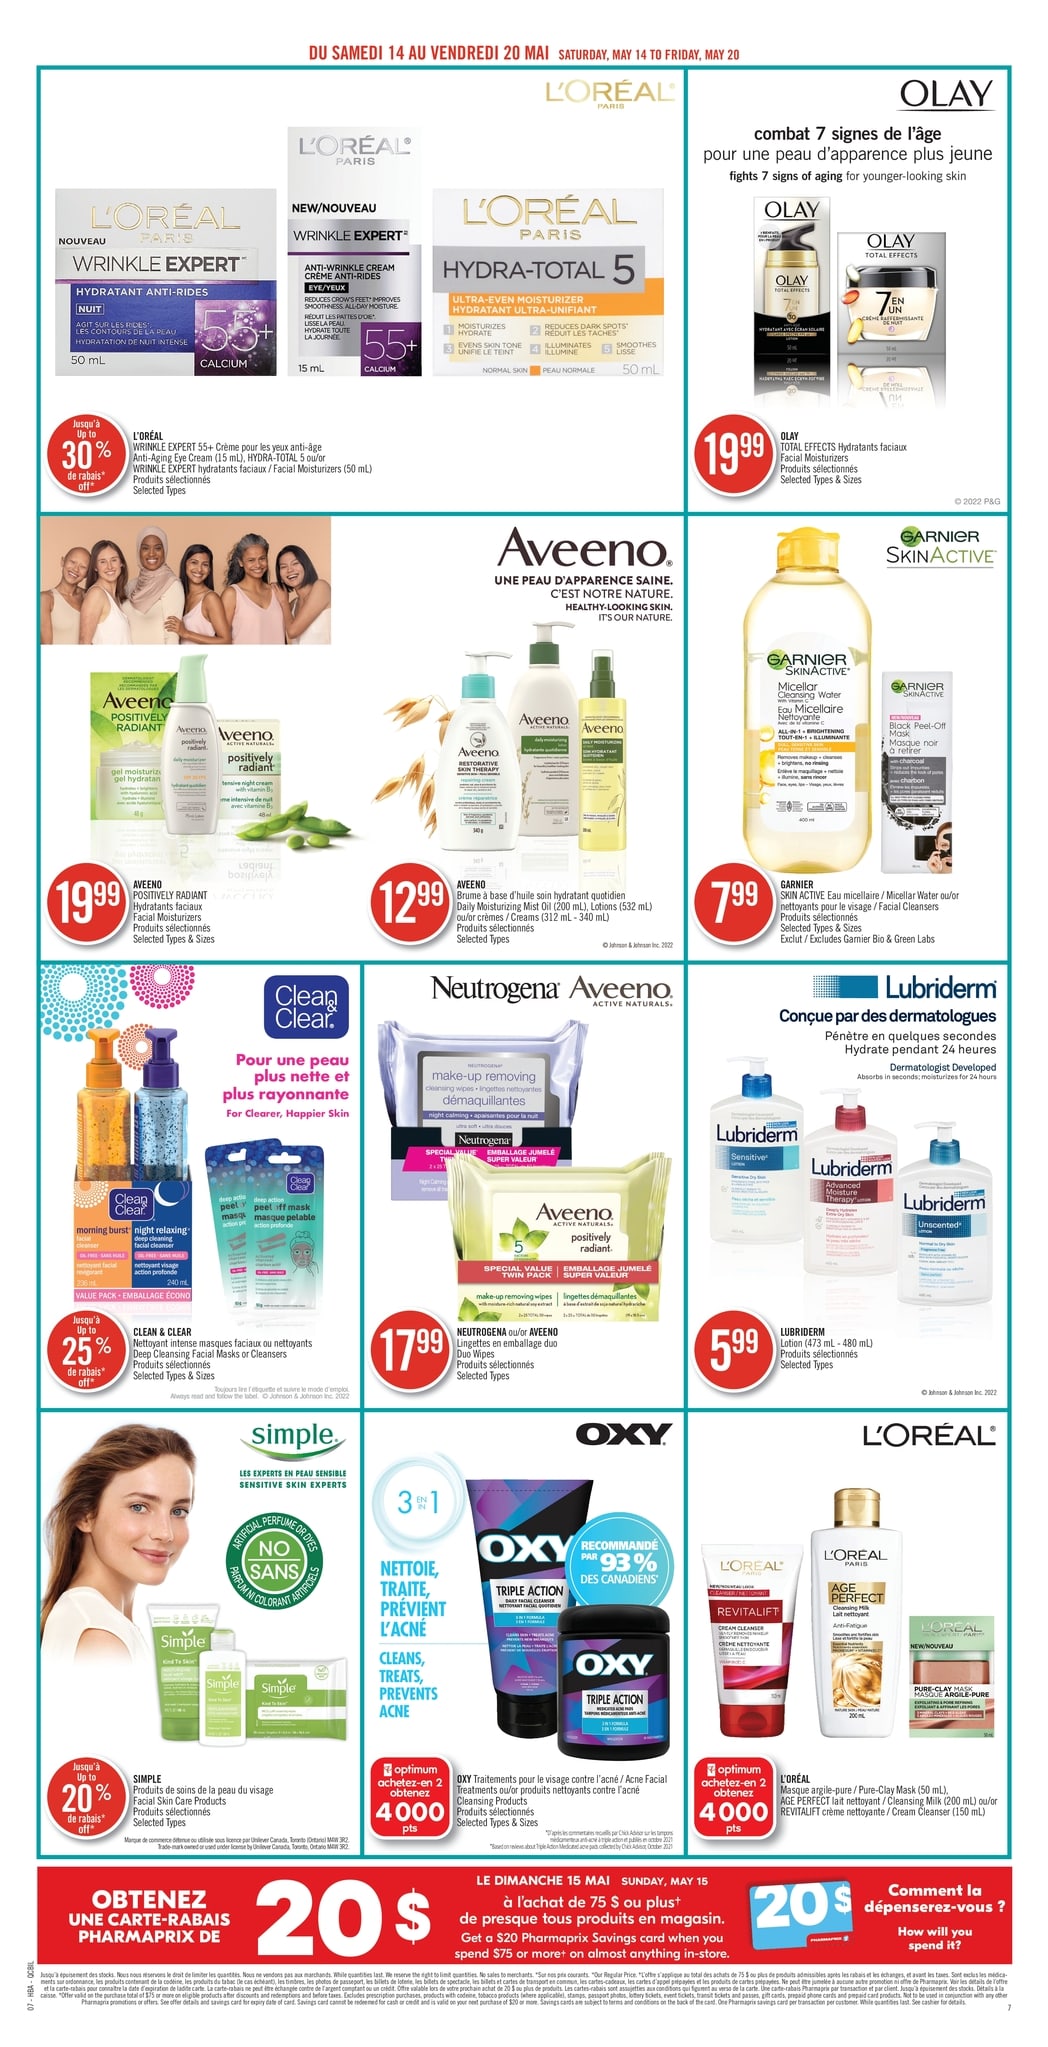 Pharmaprix - Weekly Flyer Specials - Page 11